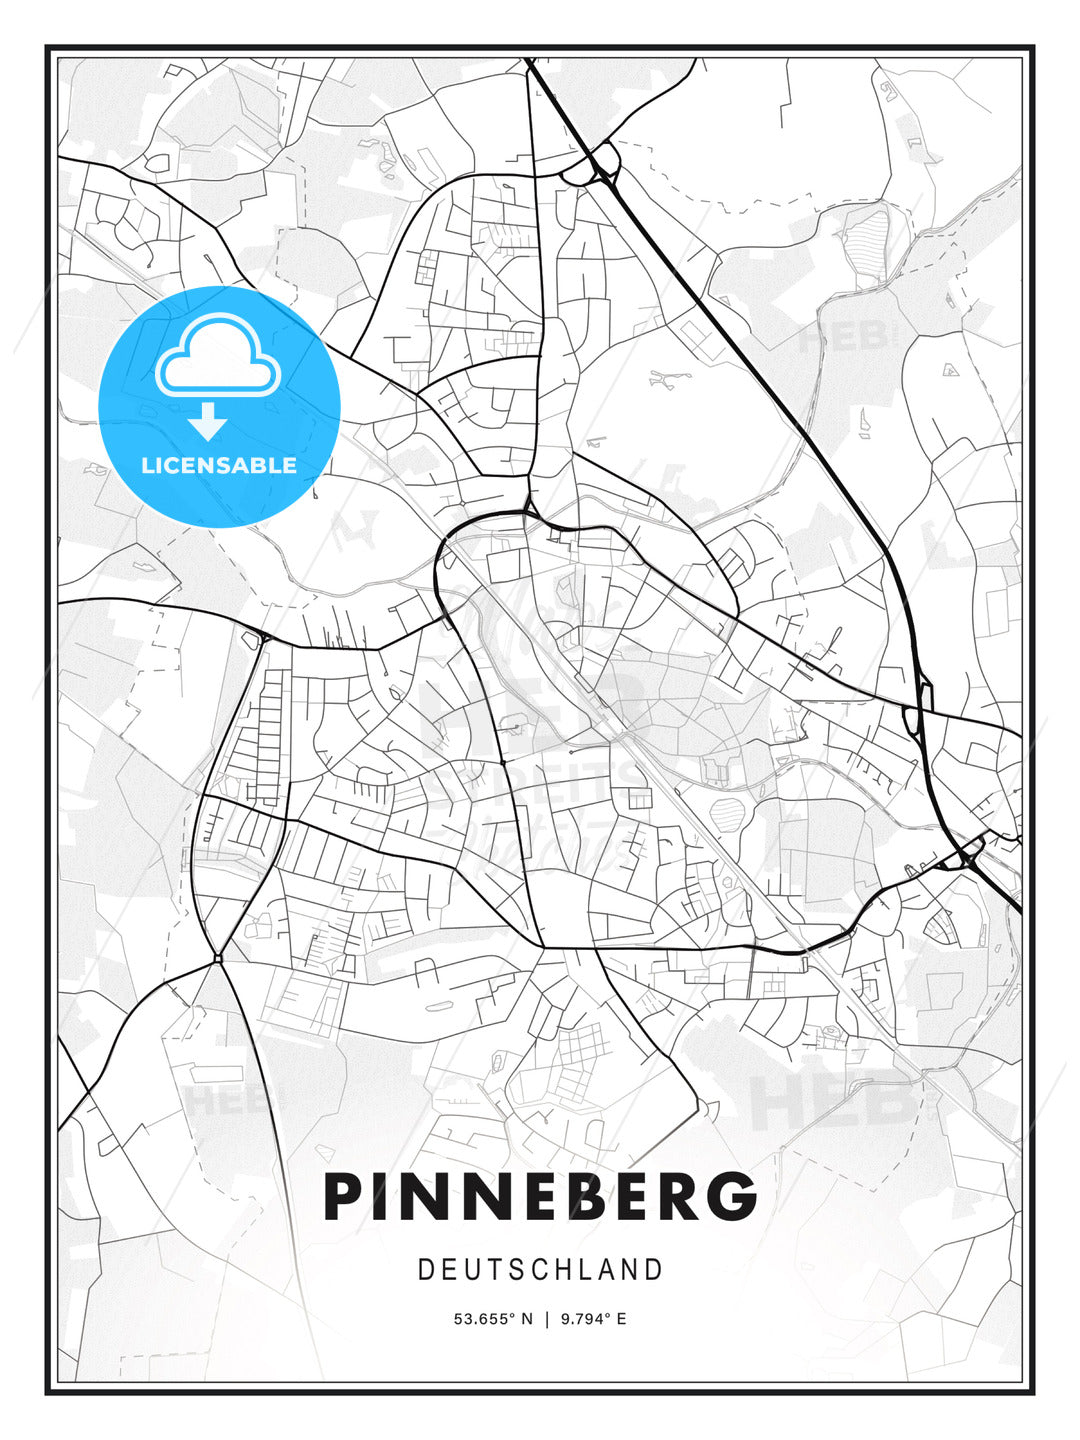 Pinneberg, Germany, Modern Print Template in Various Formats - HEBSTREITS Sketches